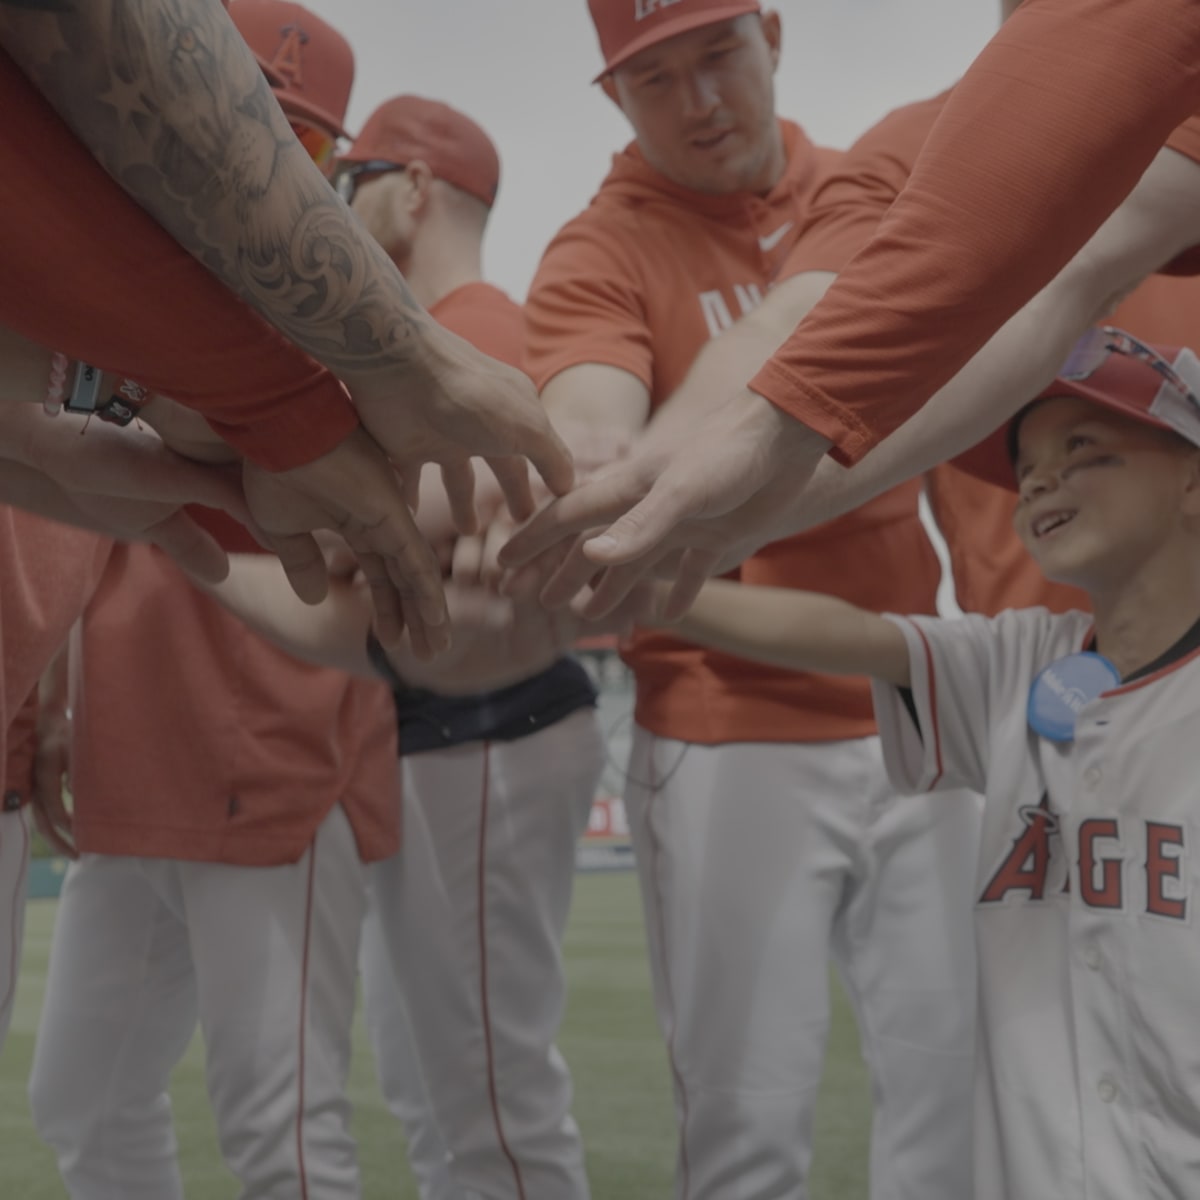 Mike Trout's hometown celebrates rare chance to see him play - Los